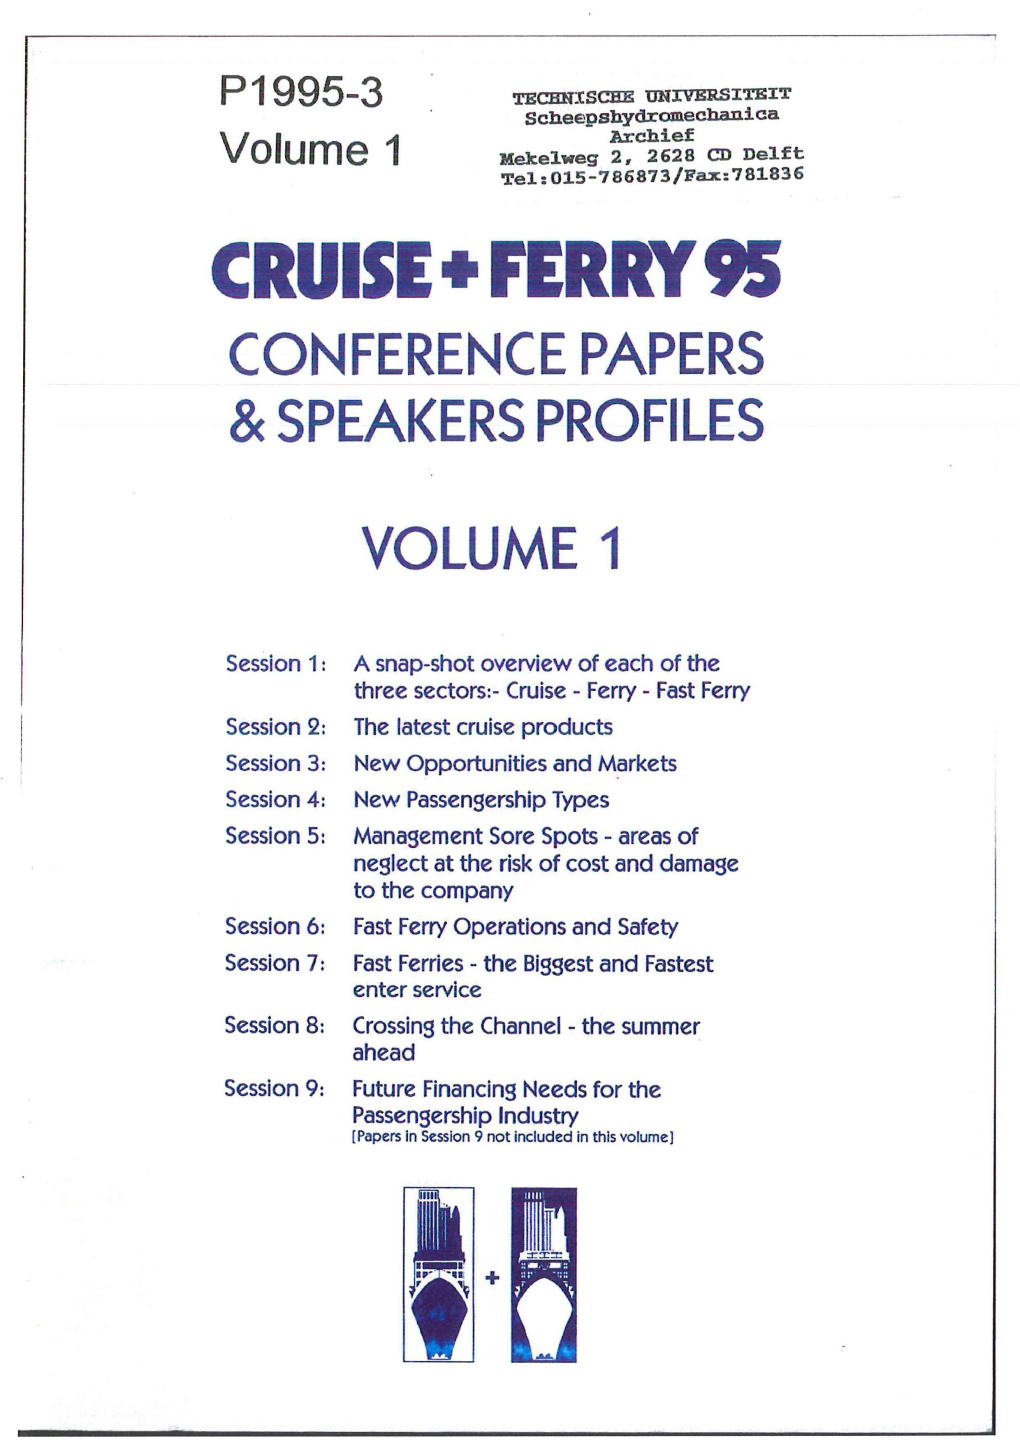 Cruise+Ferry95 Conference Papers & Speakers Profiles